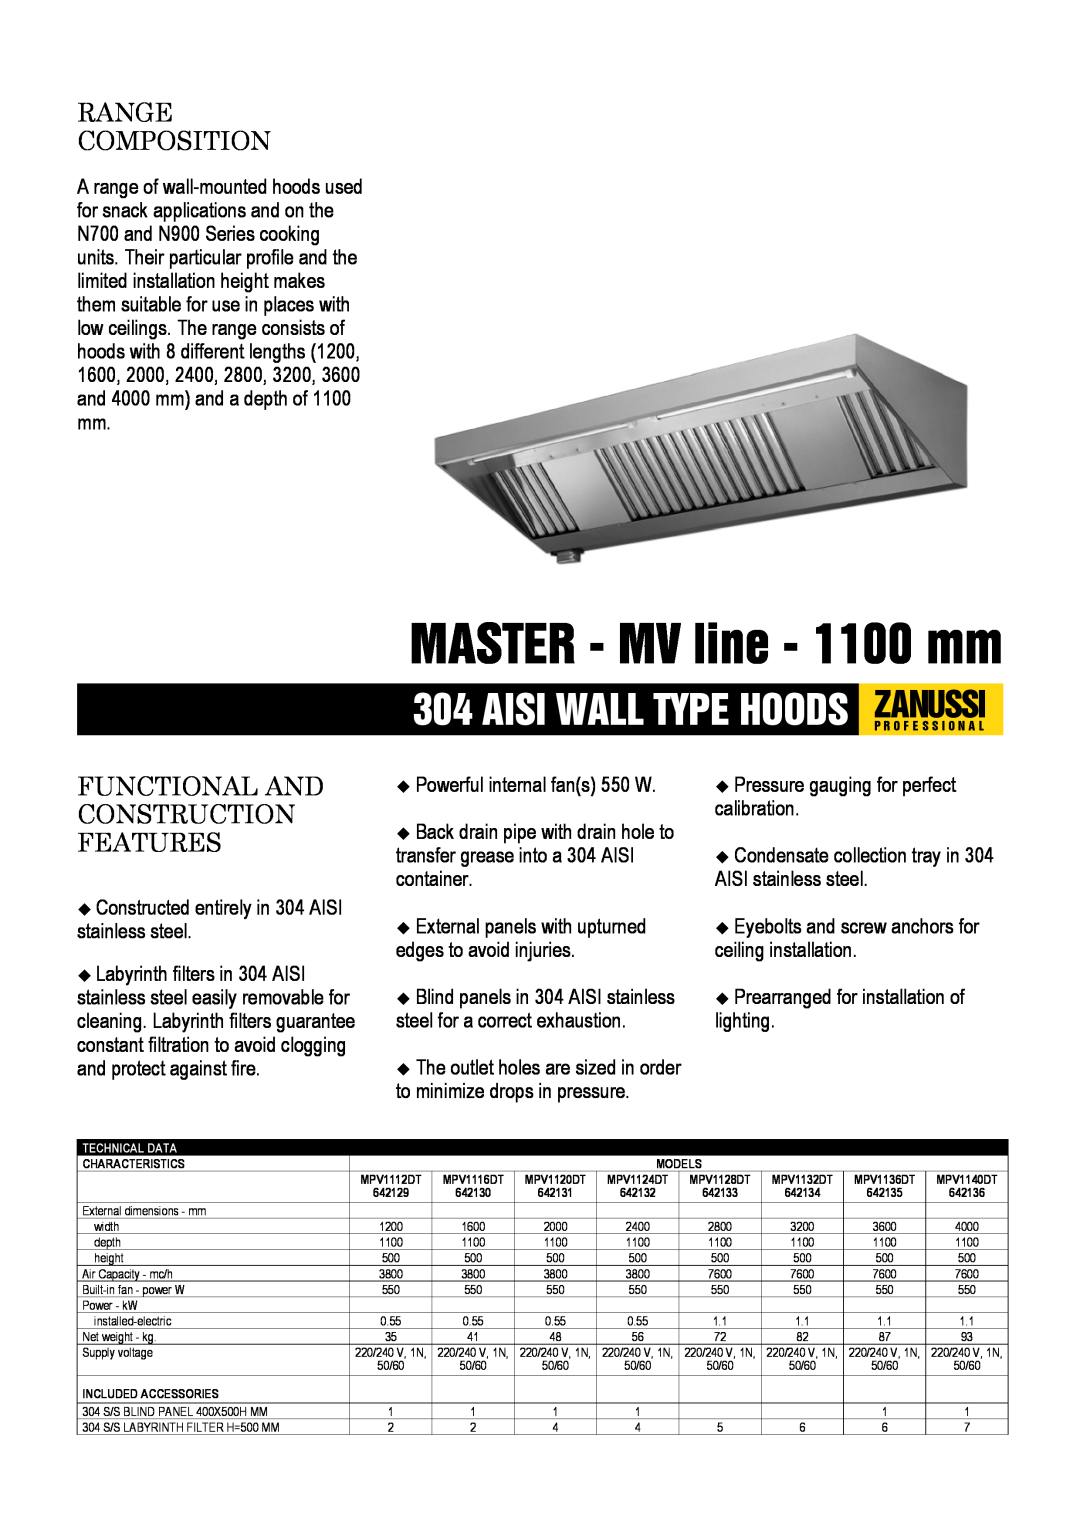 Zanussi 642134, 642135 dimensions MASTER - MV line - 1100 mm, Range Composition, Functional And Construction Features 